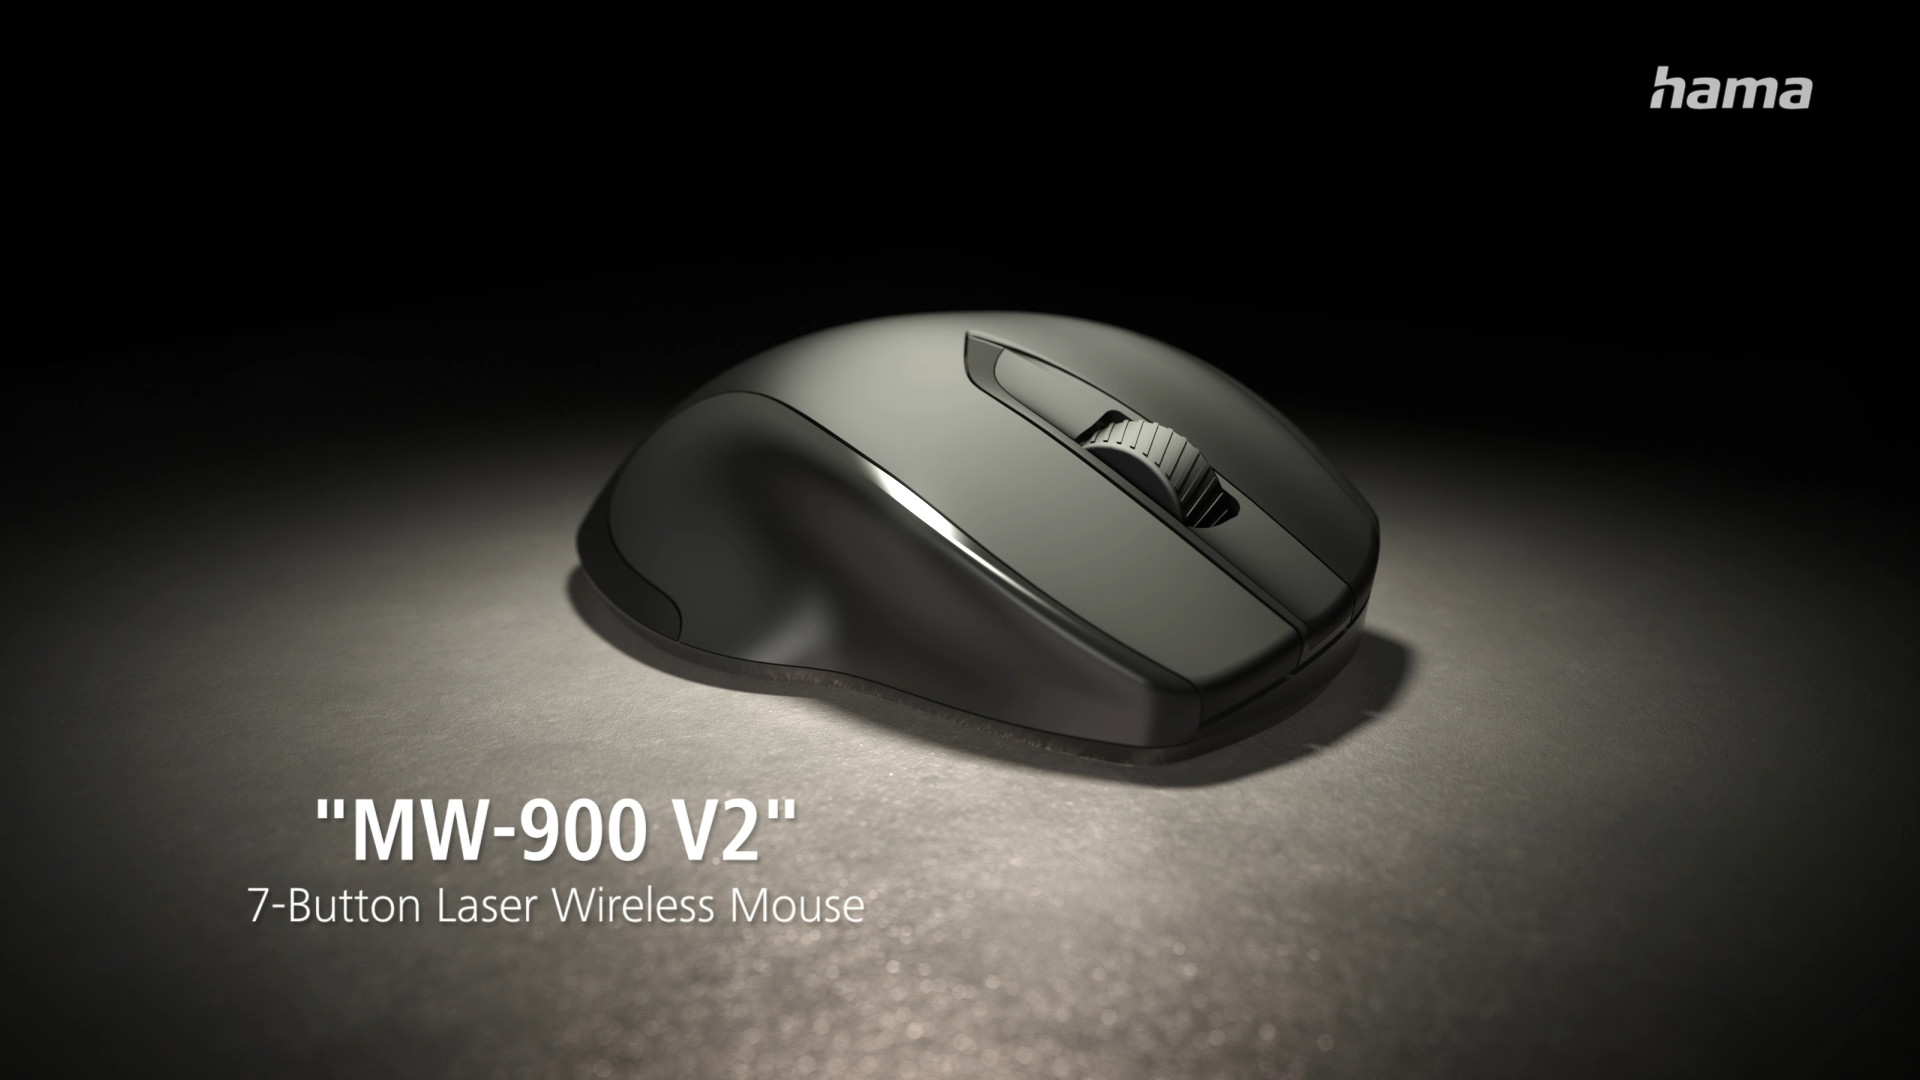 Hama "MW-900" 7-Button Laser Wireless Mouse